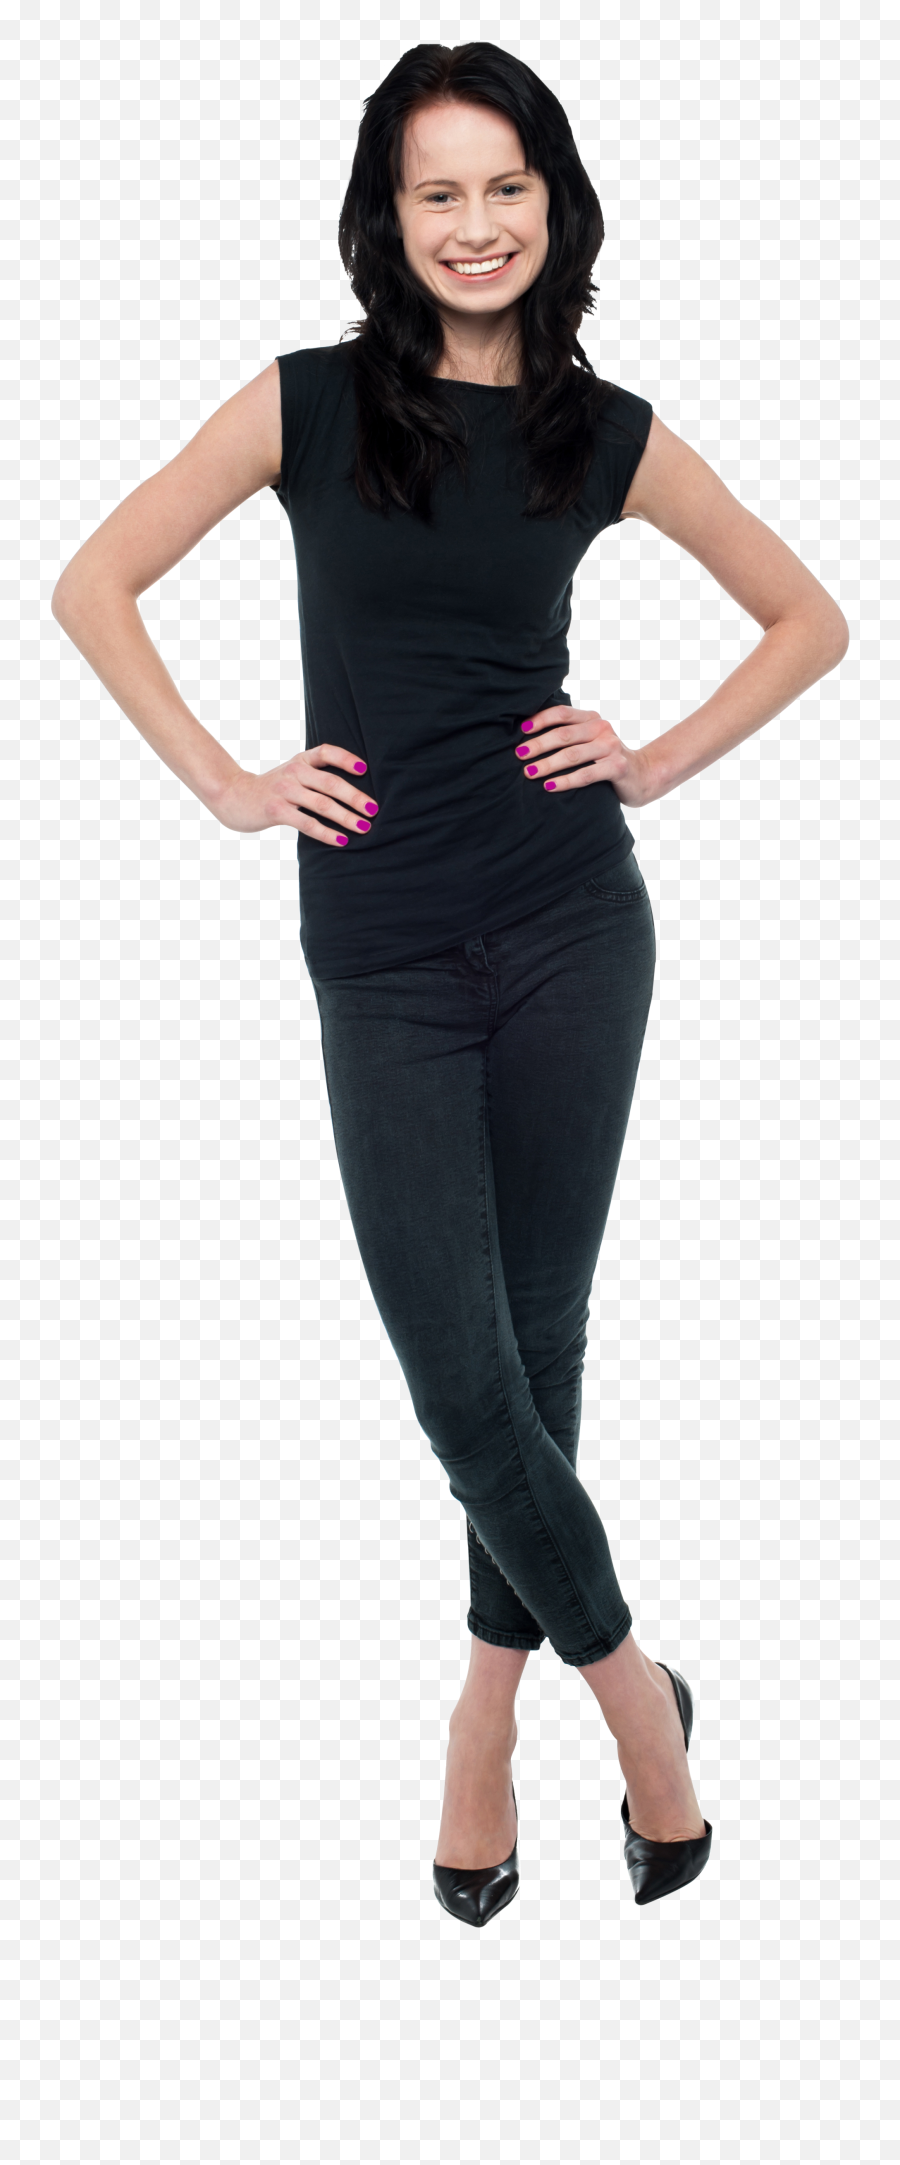 Download Standing Girl Png Image For Free - Dress,Woman Standing Png